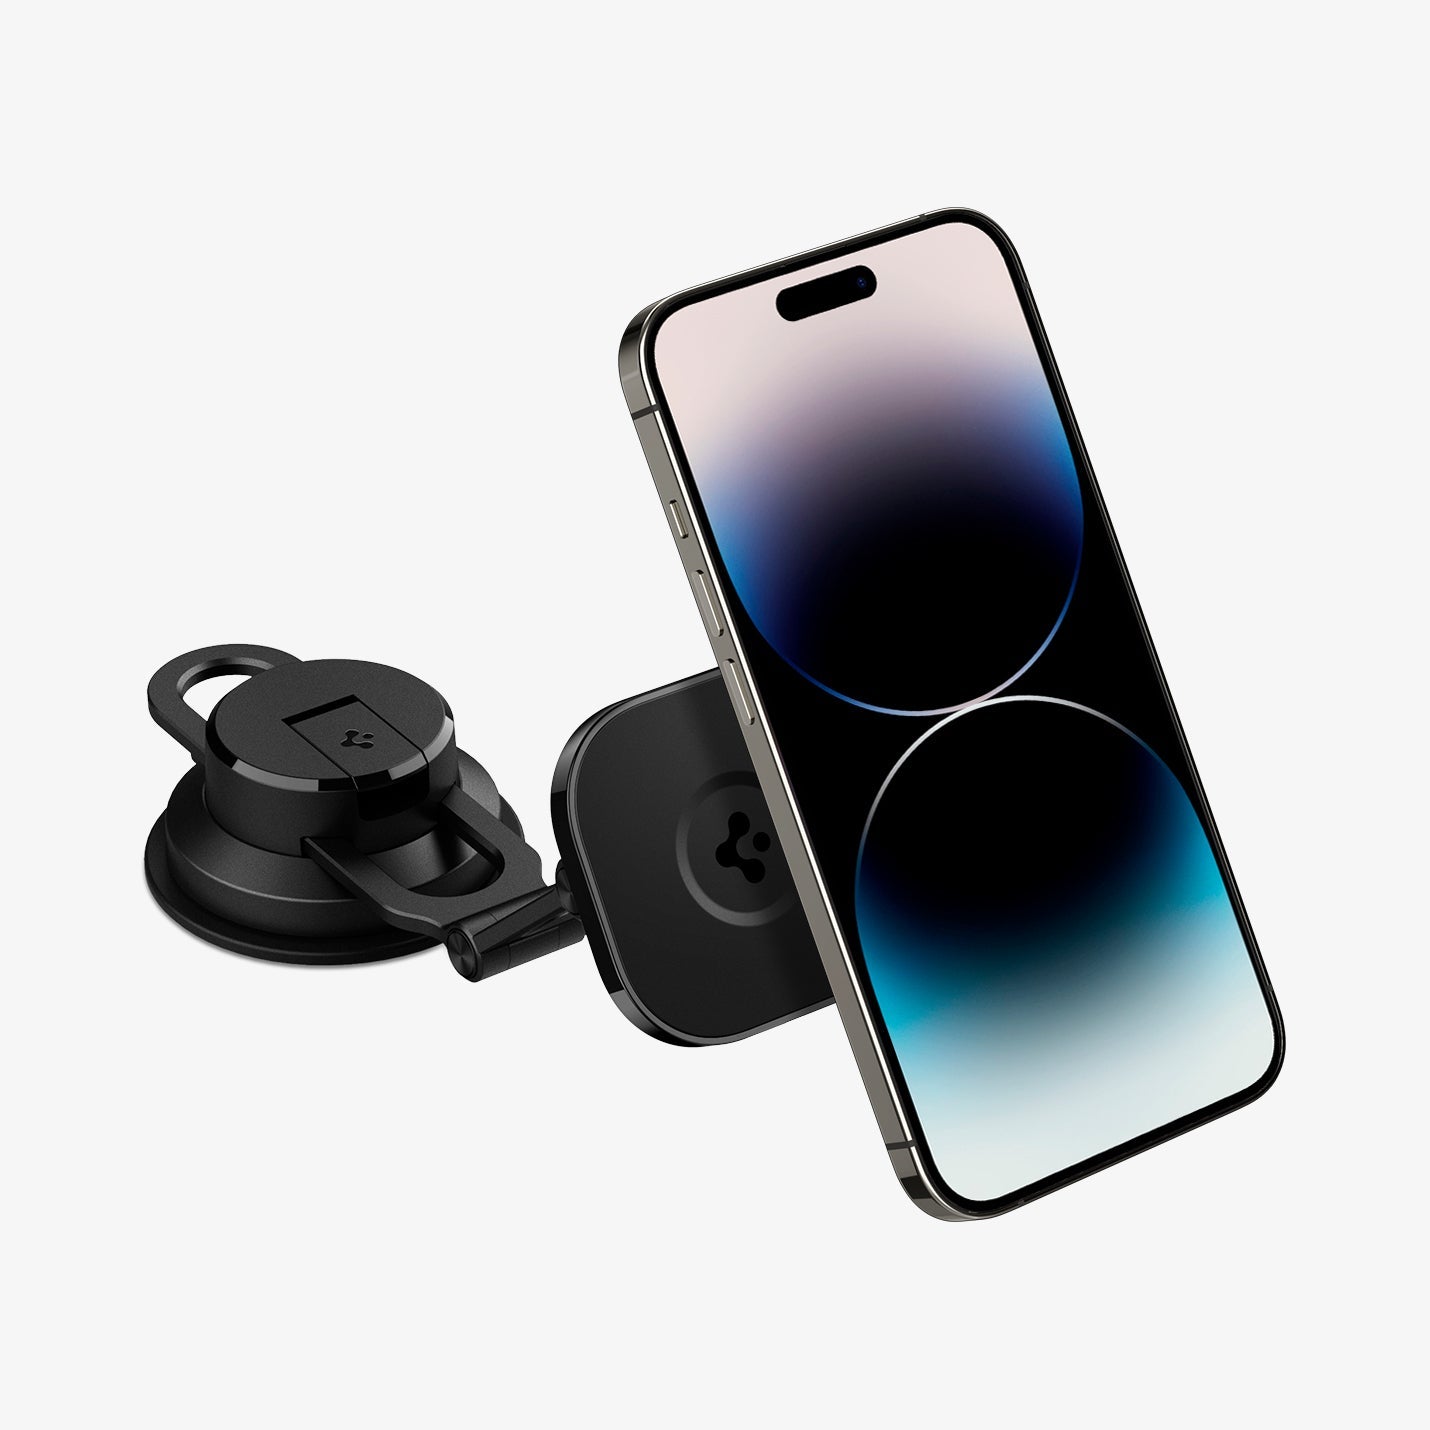 ACP04630 - OneTap 3 Black Dash/Wind Magnetic Car Mount (MagFit) in black showing the device hovering slightly in front of mount